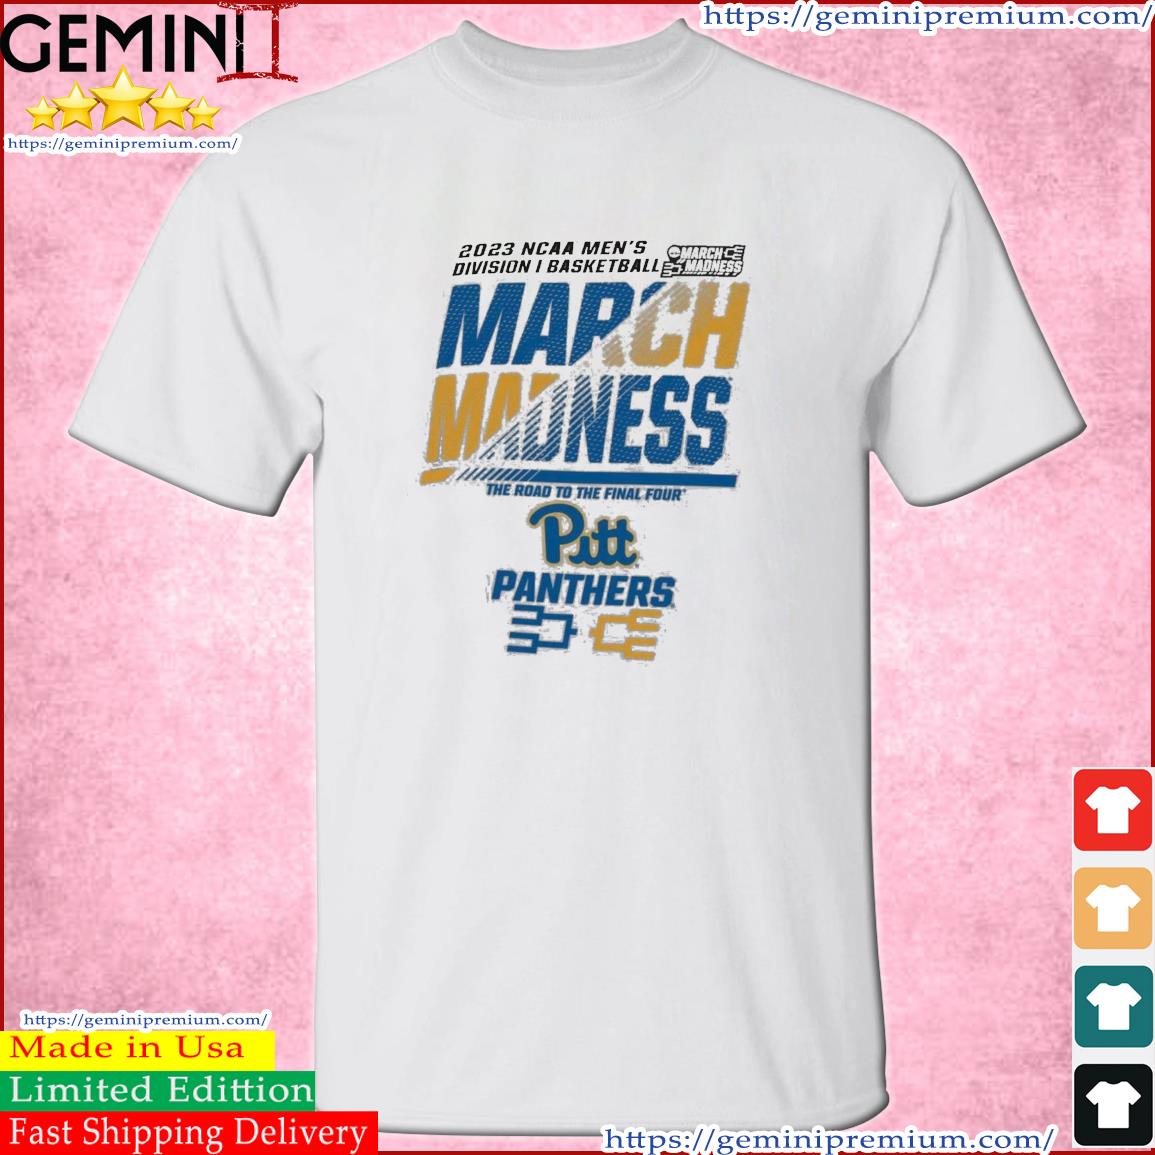 Pitt Panthers Men's Basketball 2023 NCAA March Madness The Road To Final Four Shirt